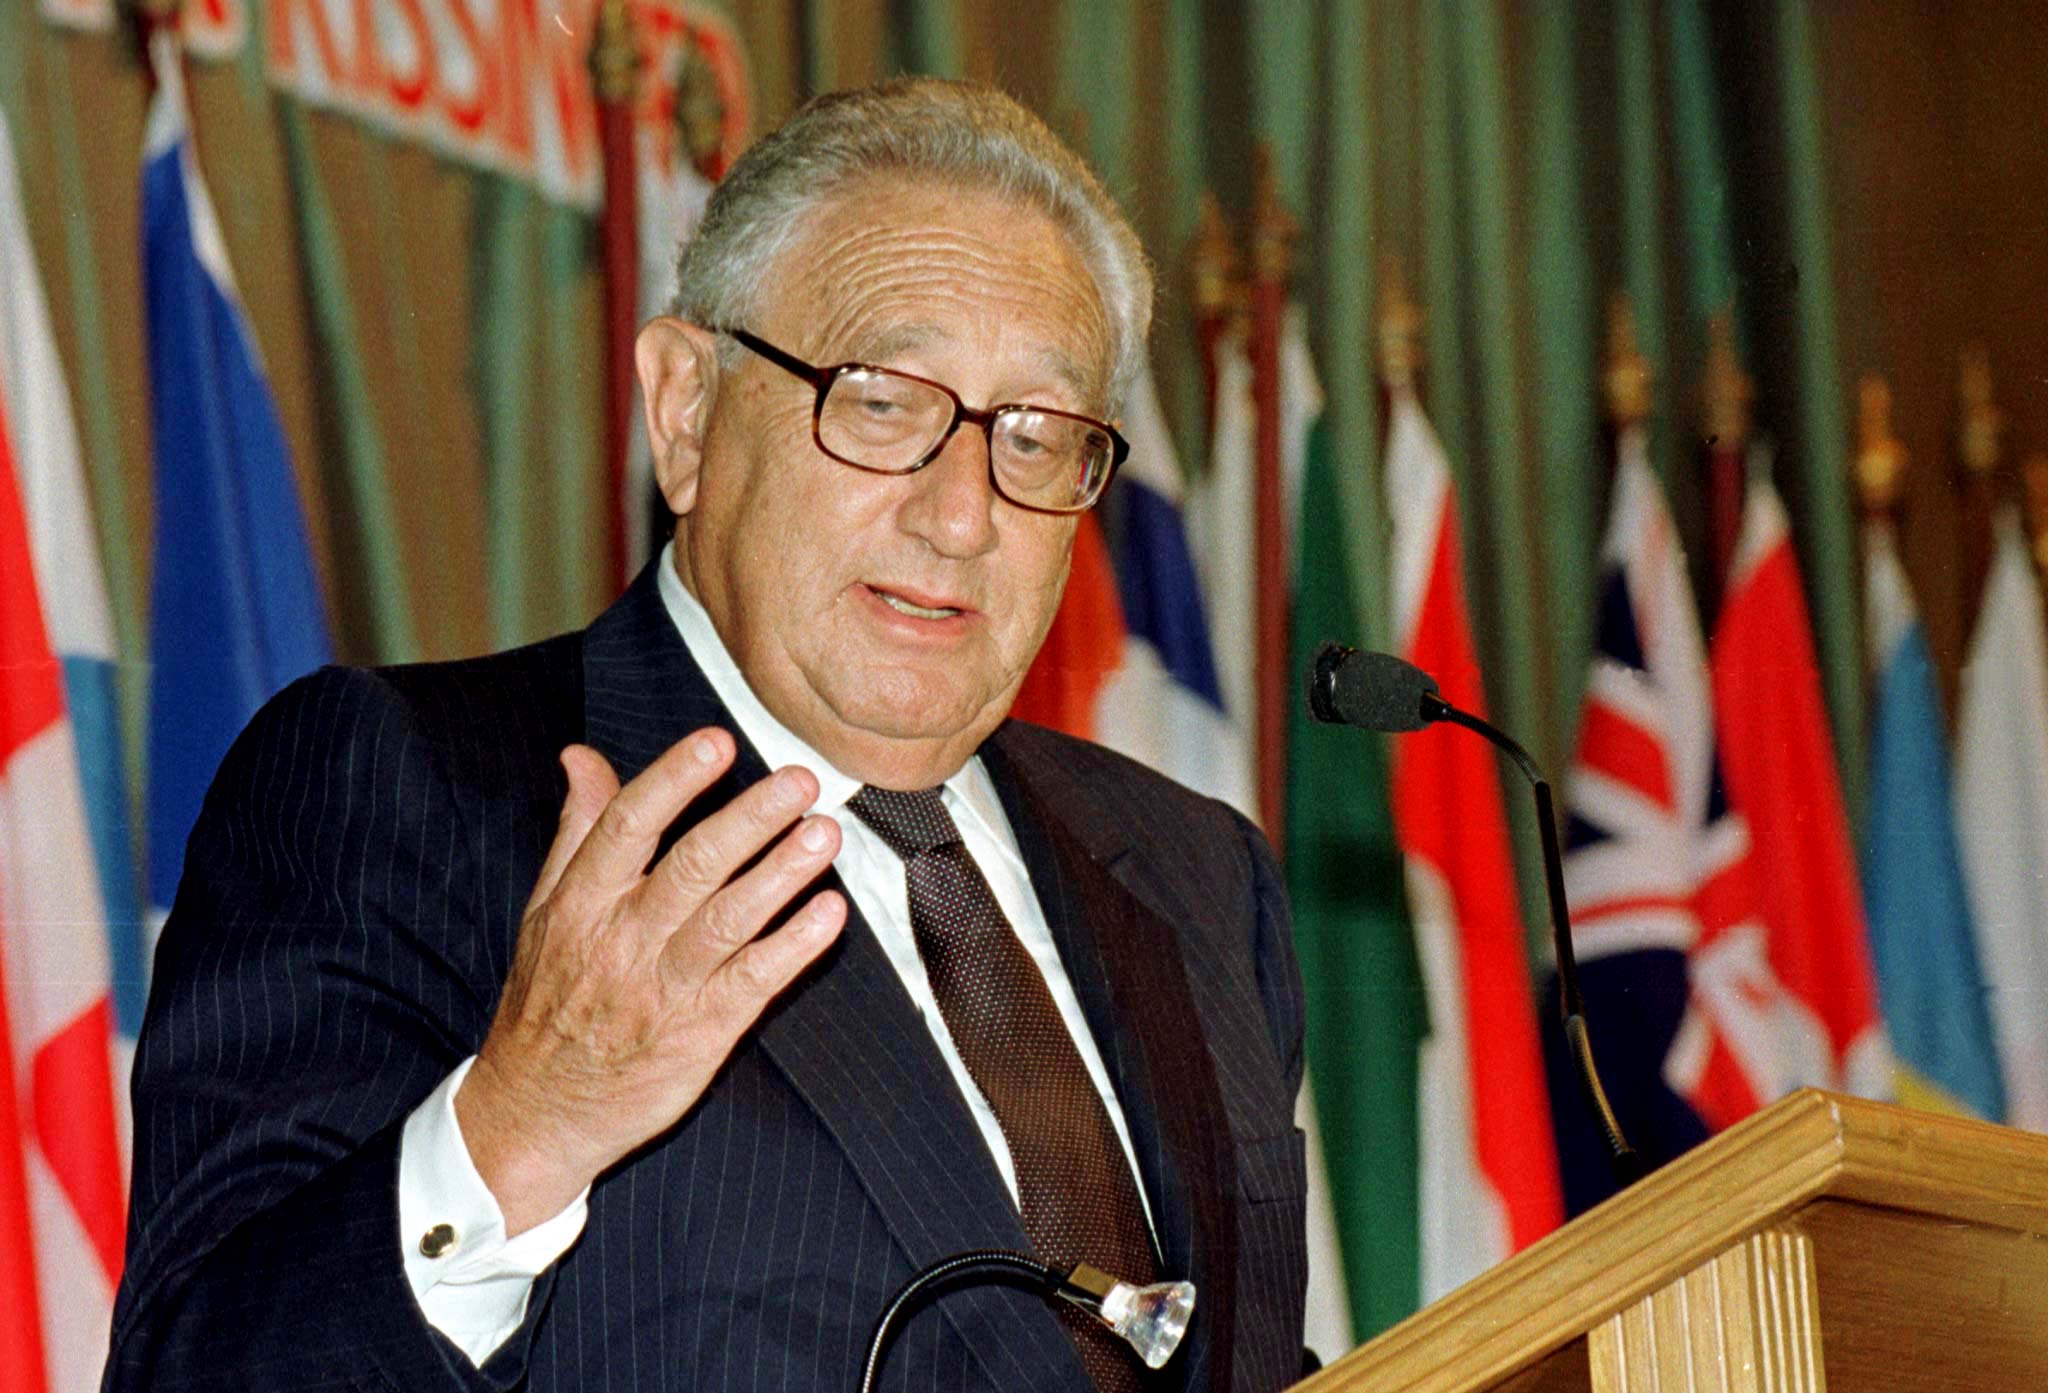 Hundred-year-old Kissinger died： from fleeing the Nazis to becoming the most influential Secretary of State in the United States.